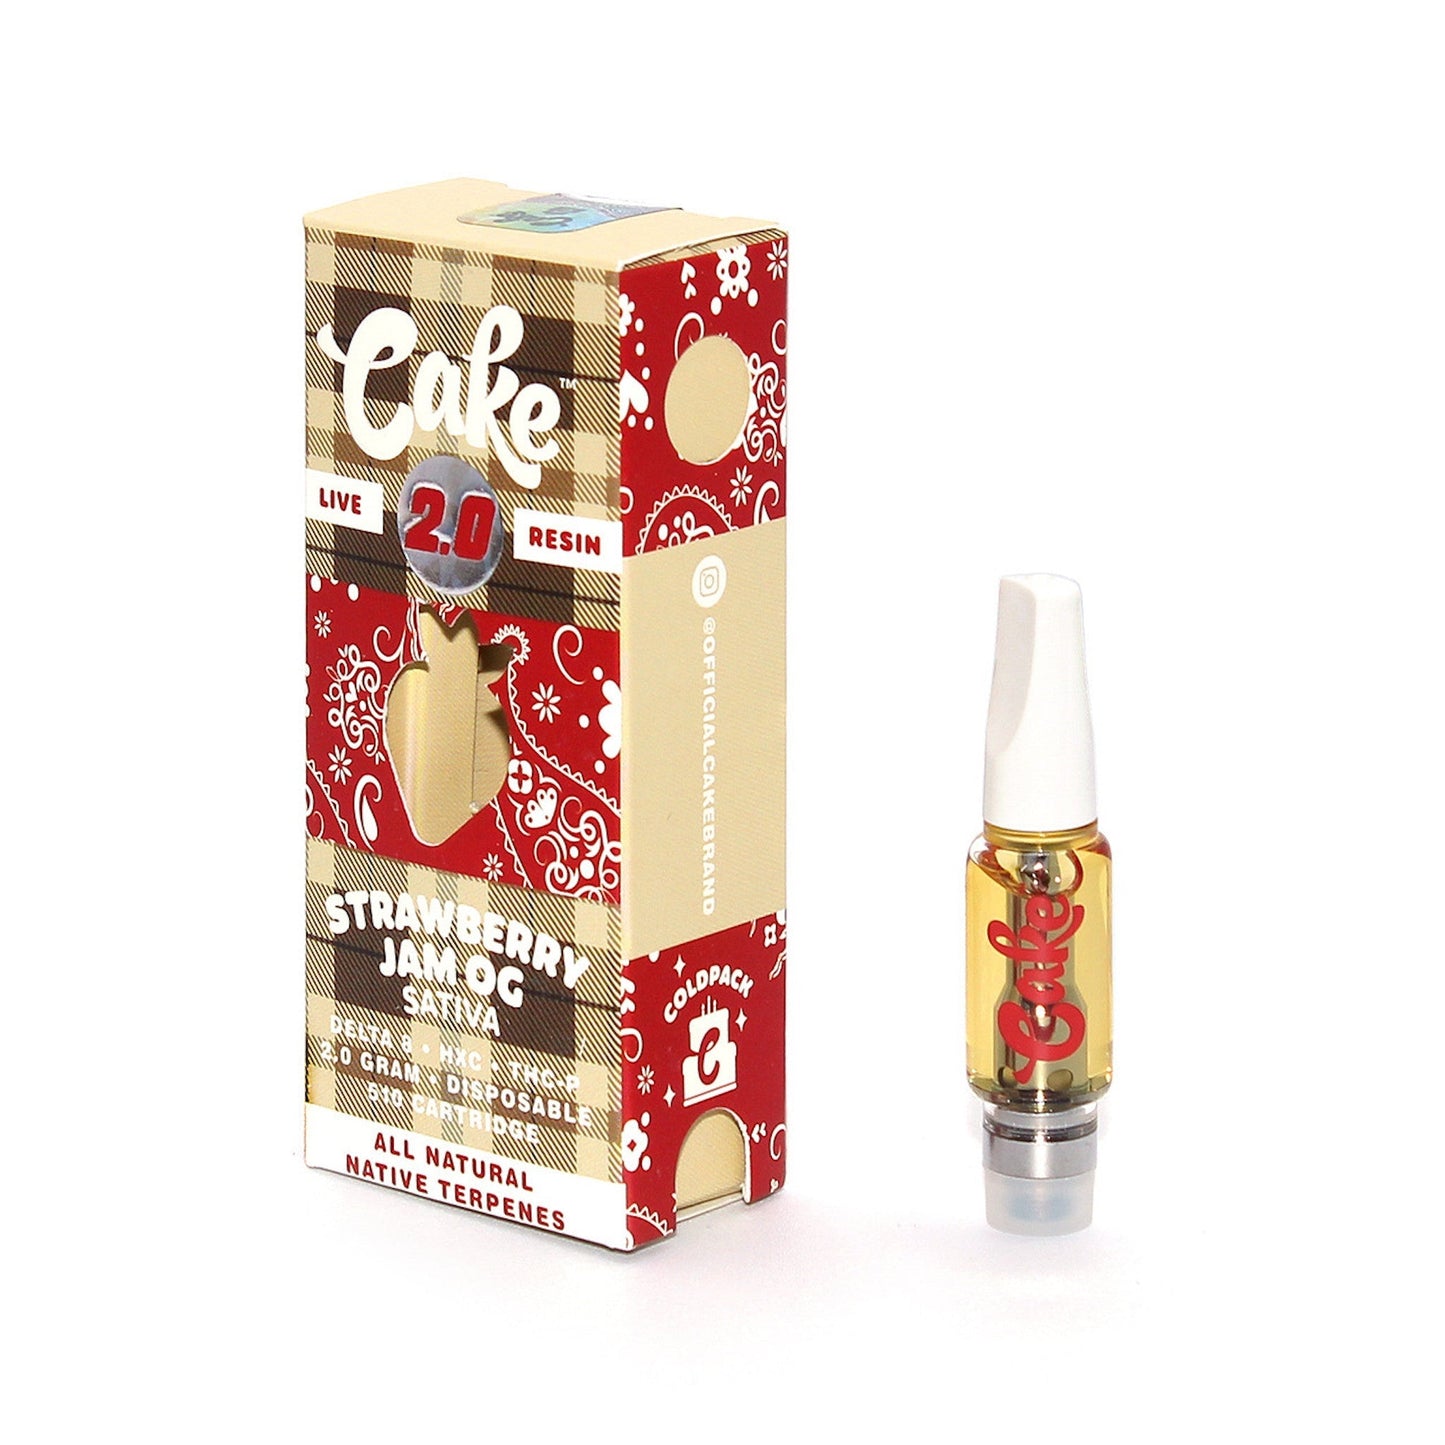 Cake Cold Pack Live Resin Cartridge - 2000mg